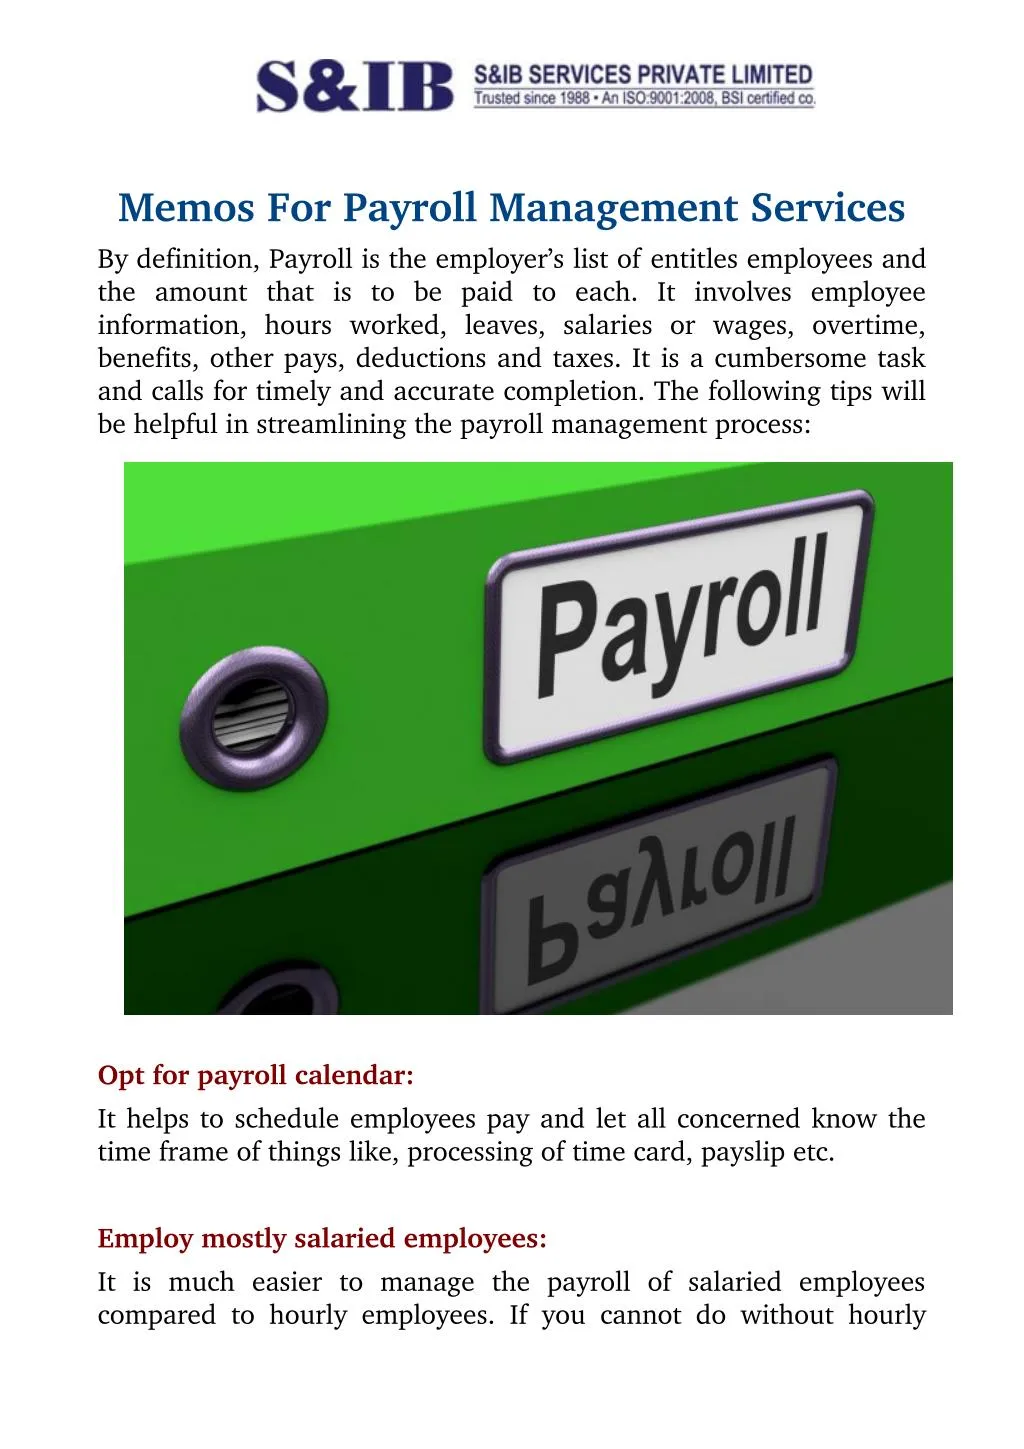 memos for payroll management services